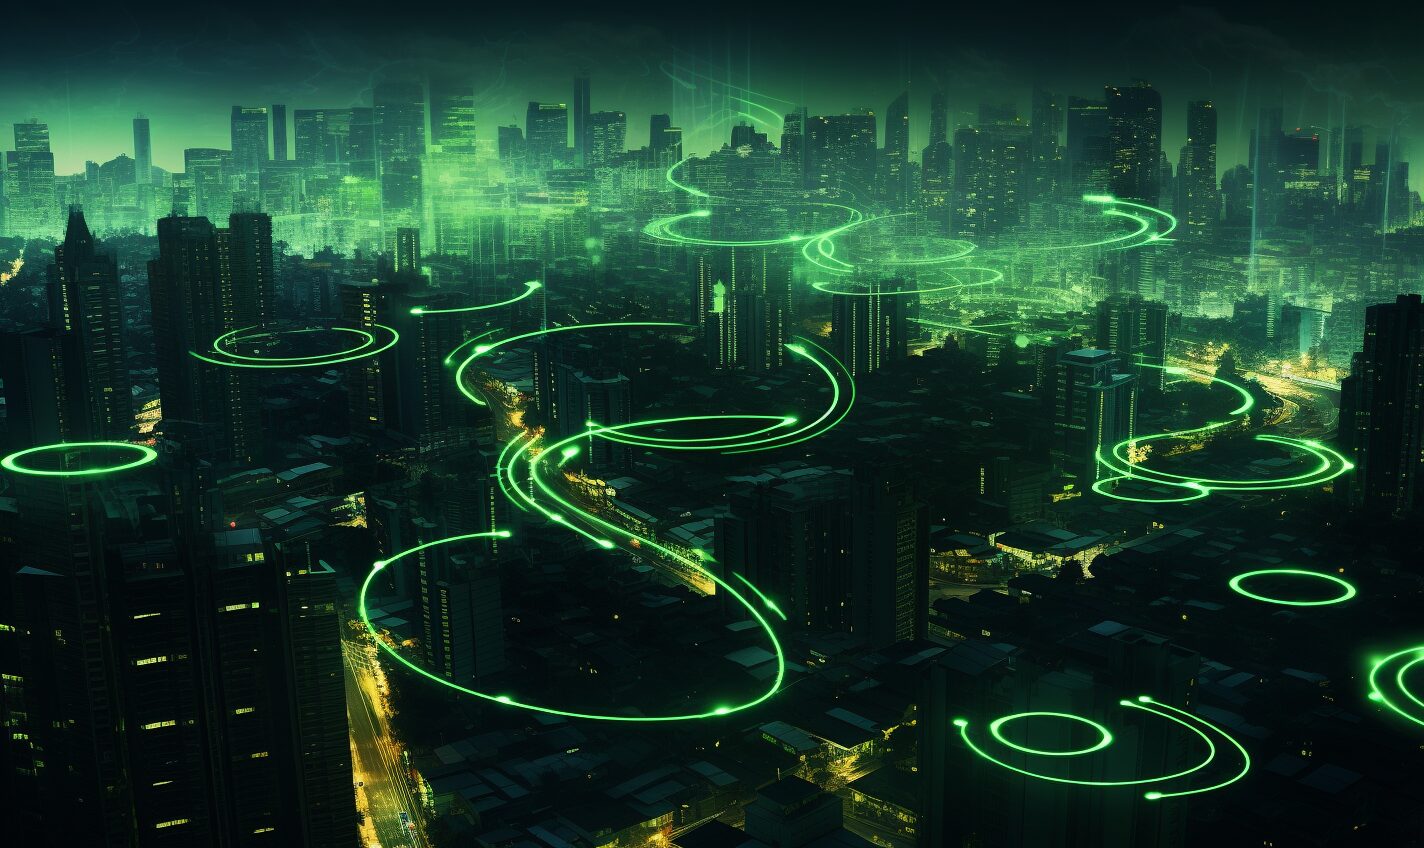 w-fi signals span across a futuristic city with a green glow